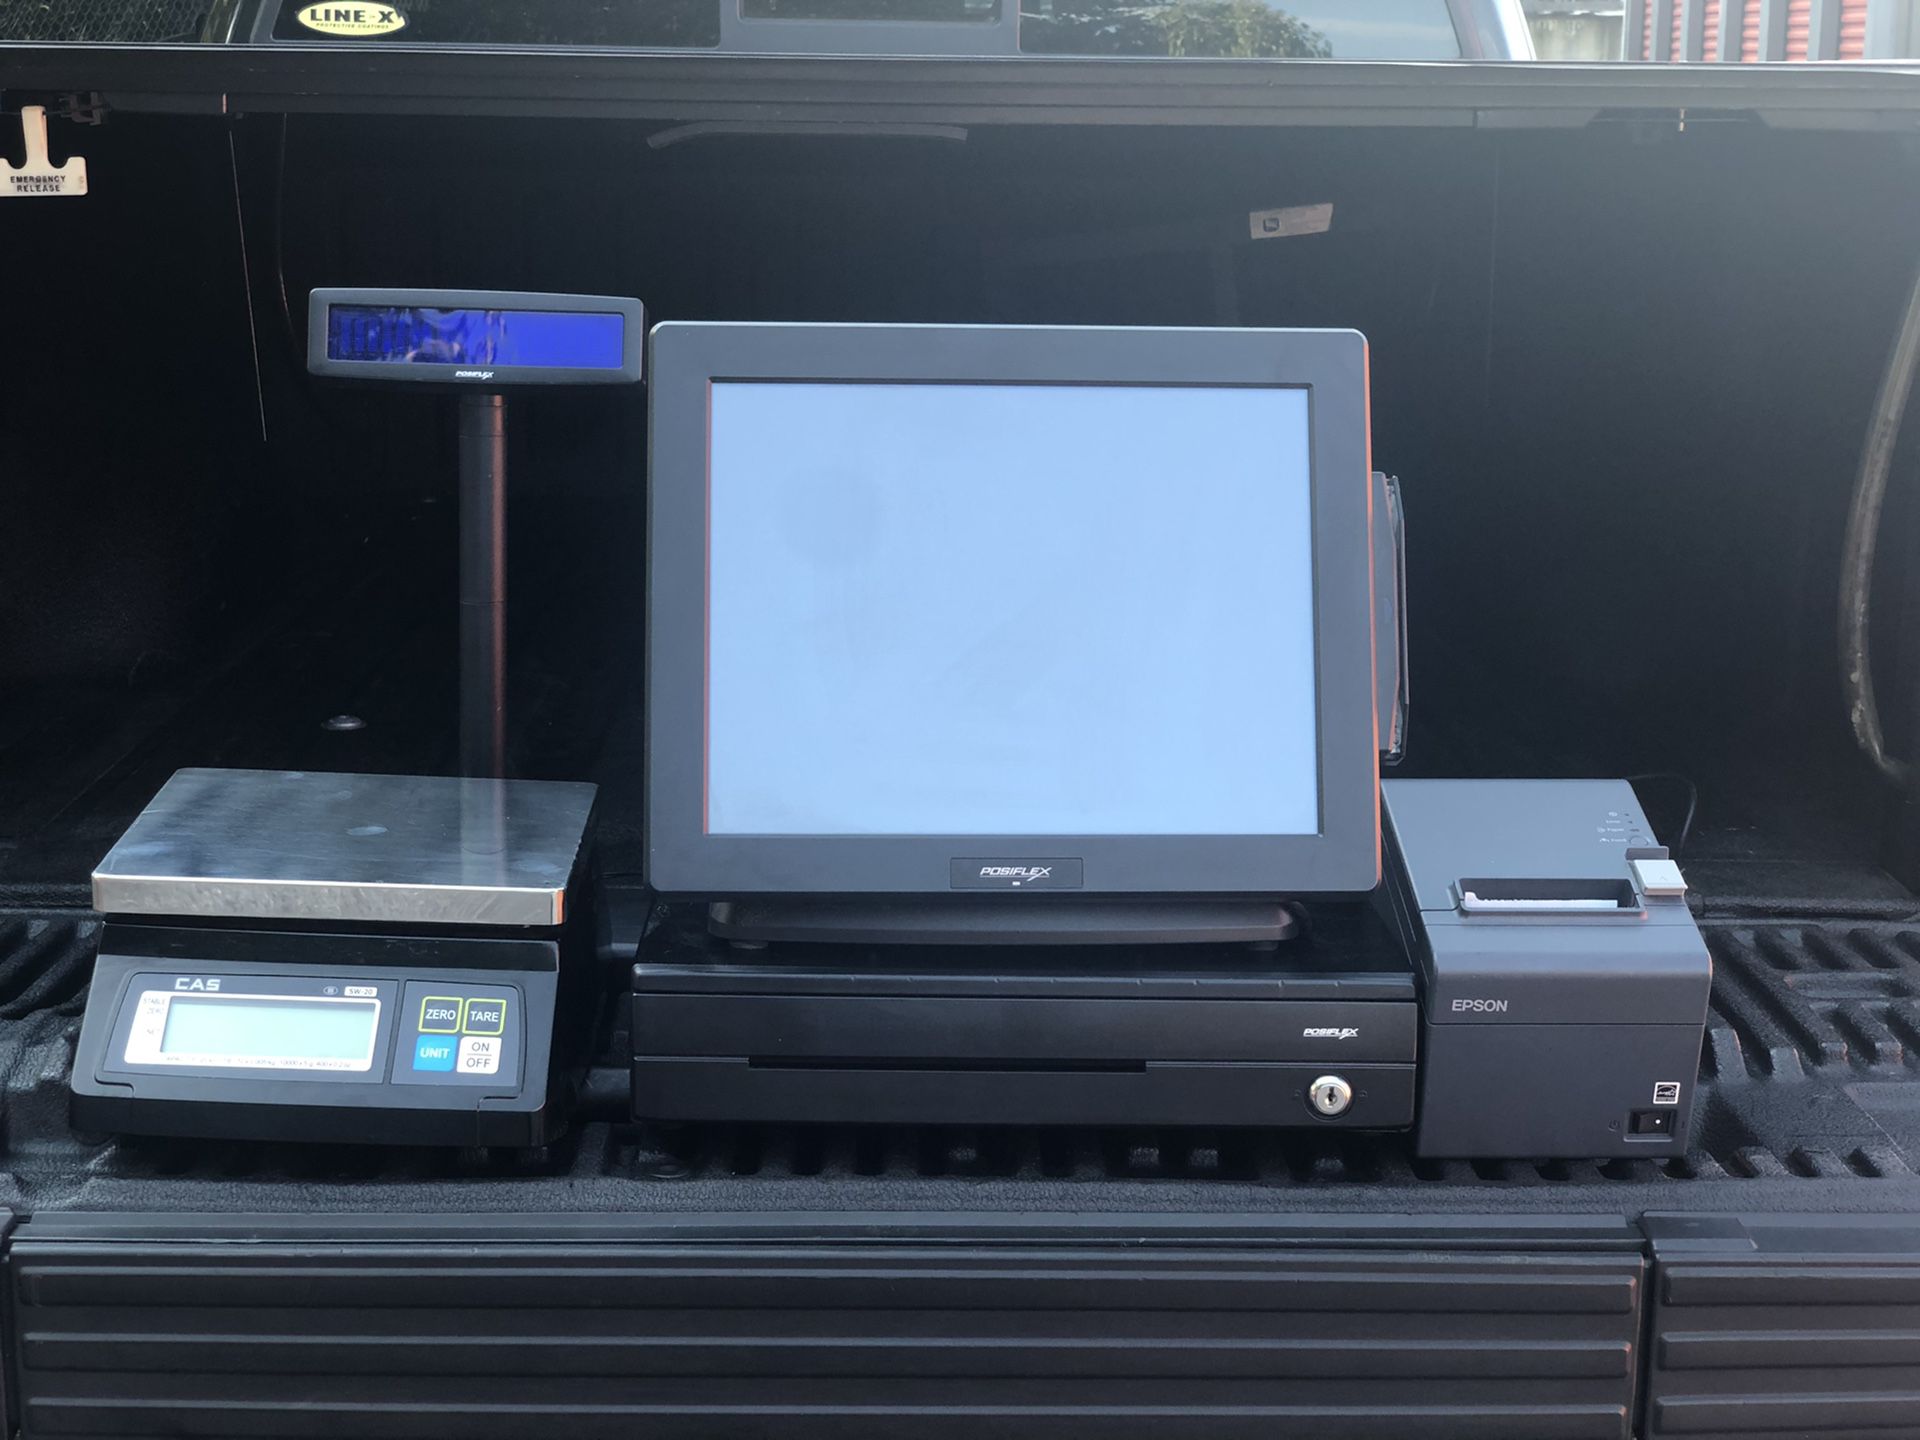 POS SYSTEM WITH SCALE, PRINTER and CASH DRAWER!